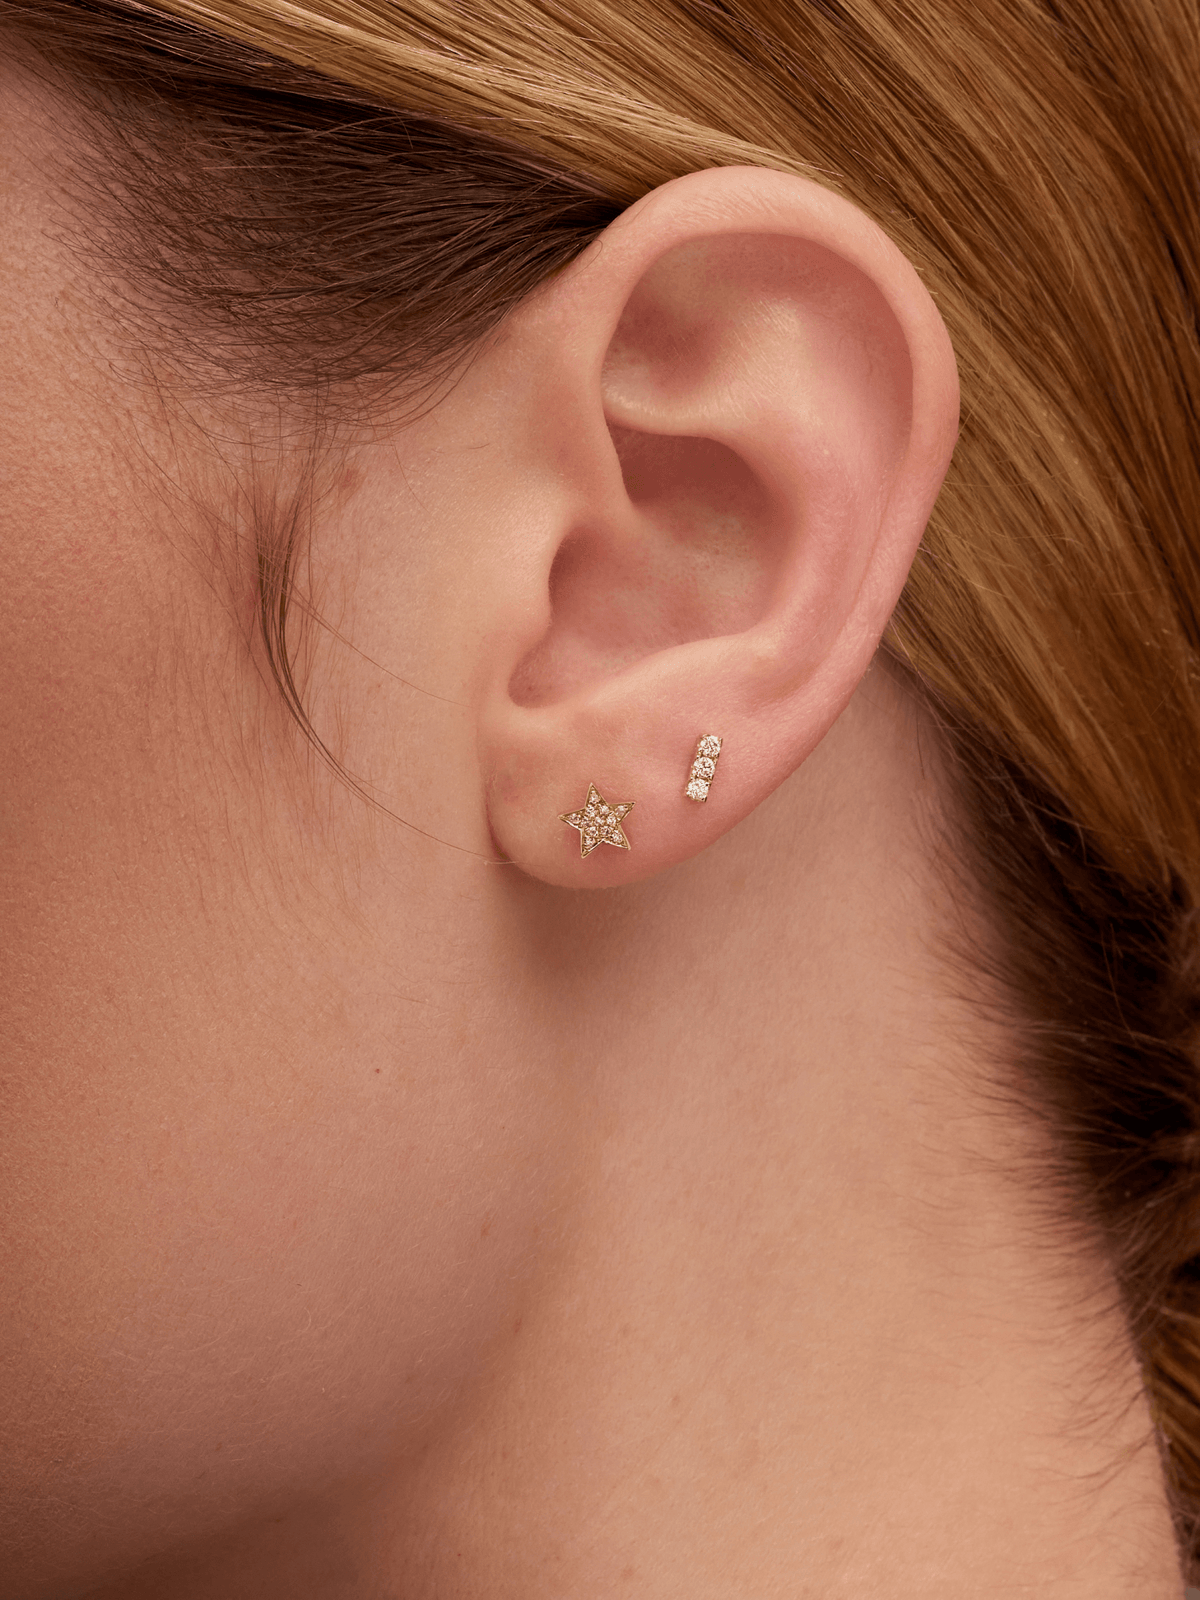 Mini gold star earring paired with diamond bar stud on model ear